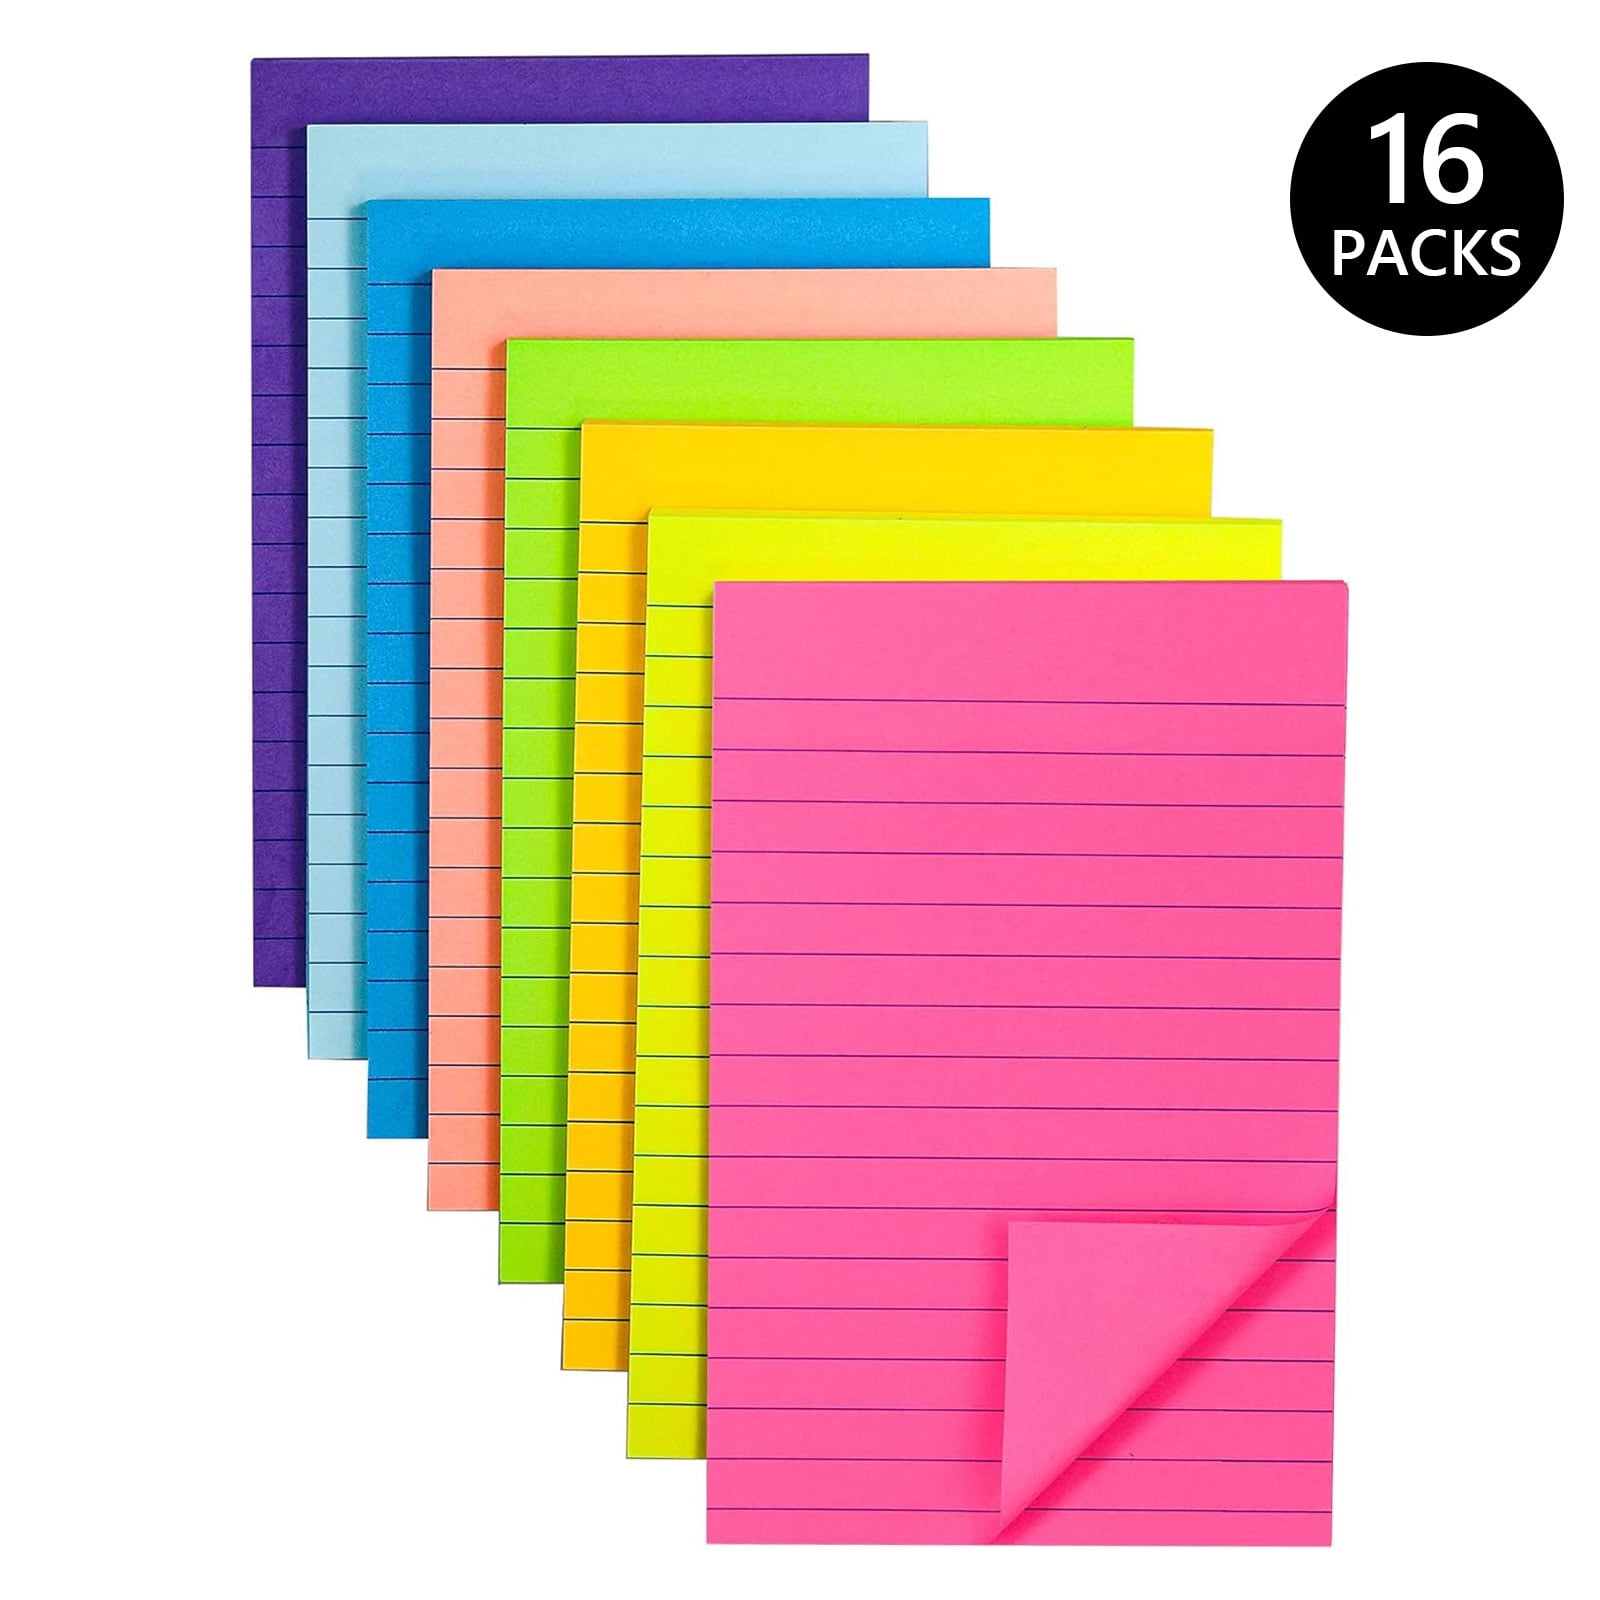 Highland 6549-B Sticky Note Pads, 3 x 3, Assorted, 100 Sheets 